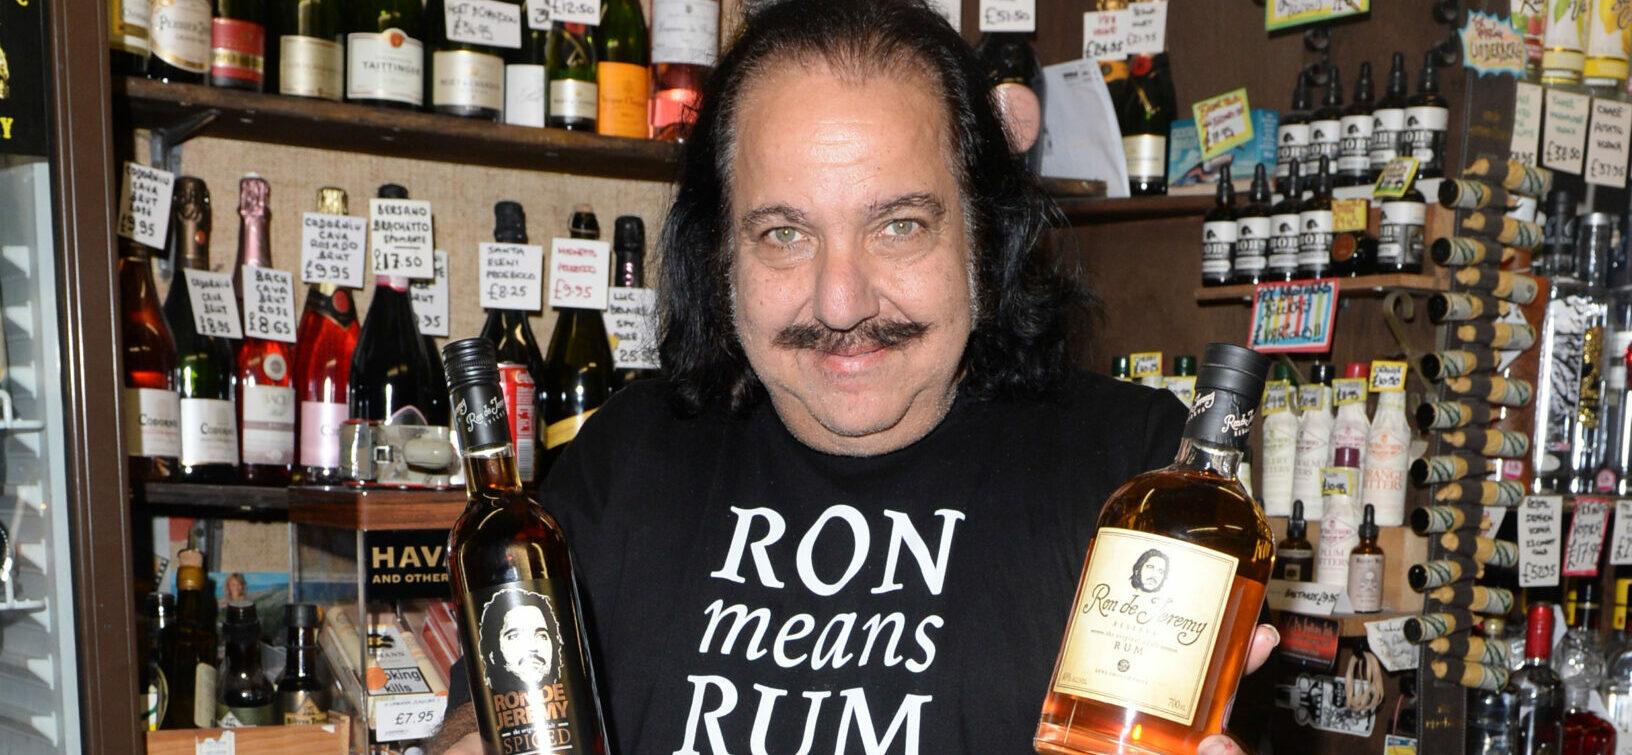 Porn Star Ron Jeremy’s 34 Criminal Counts Have Officially Been Dismissed